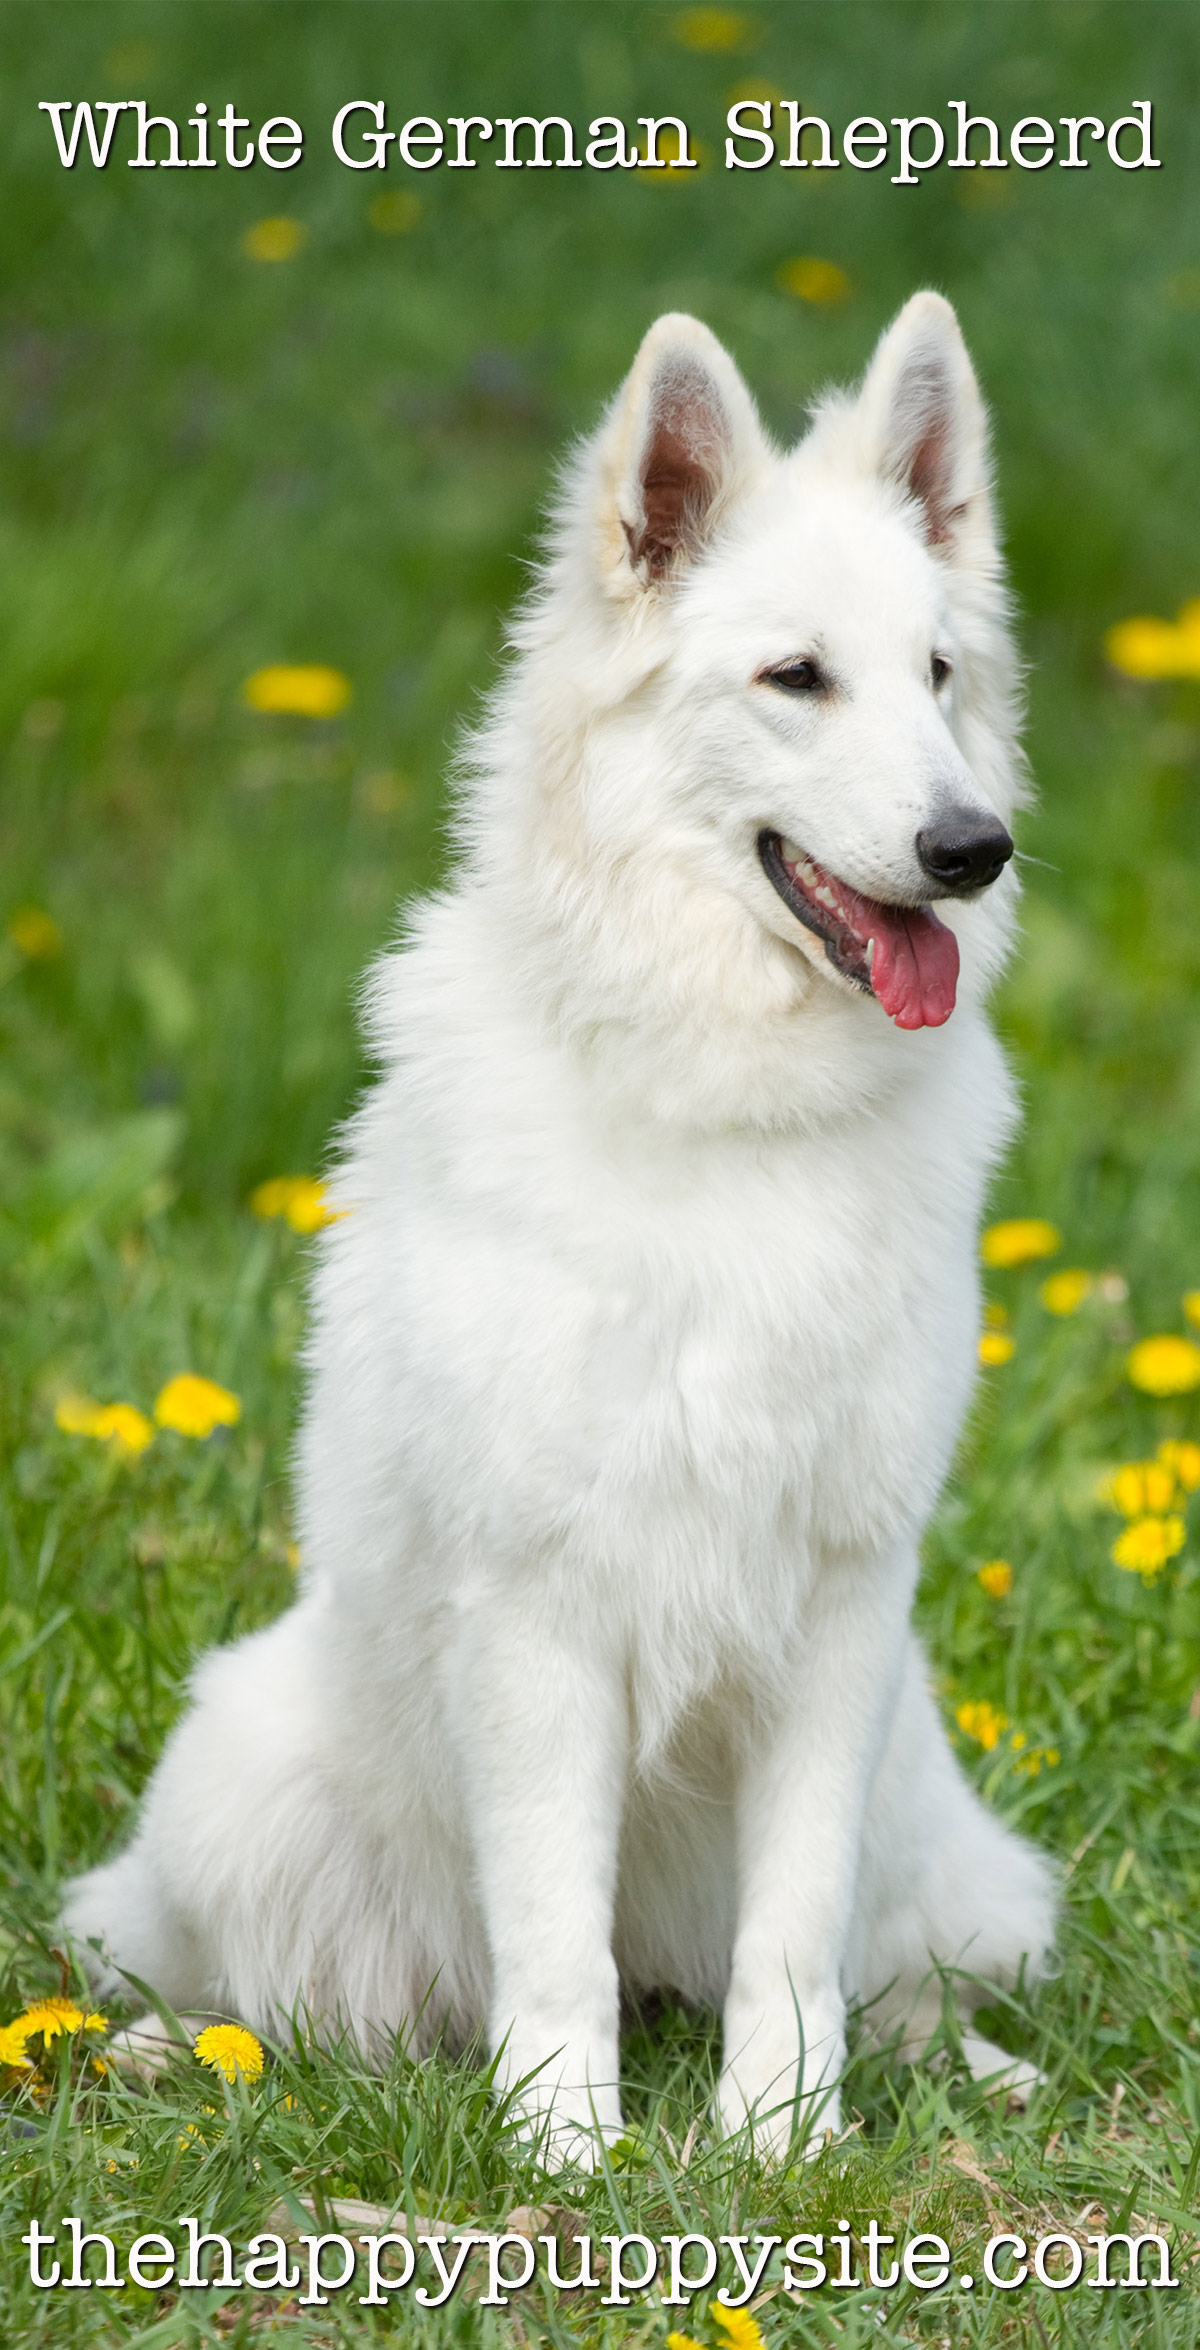 White German Shepherd Dog Breed - A Complete Guide